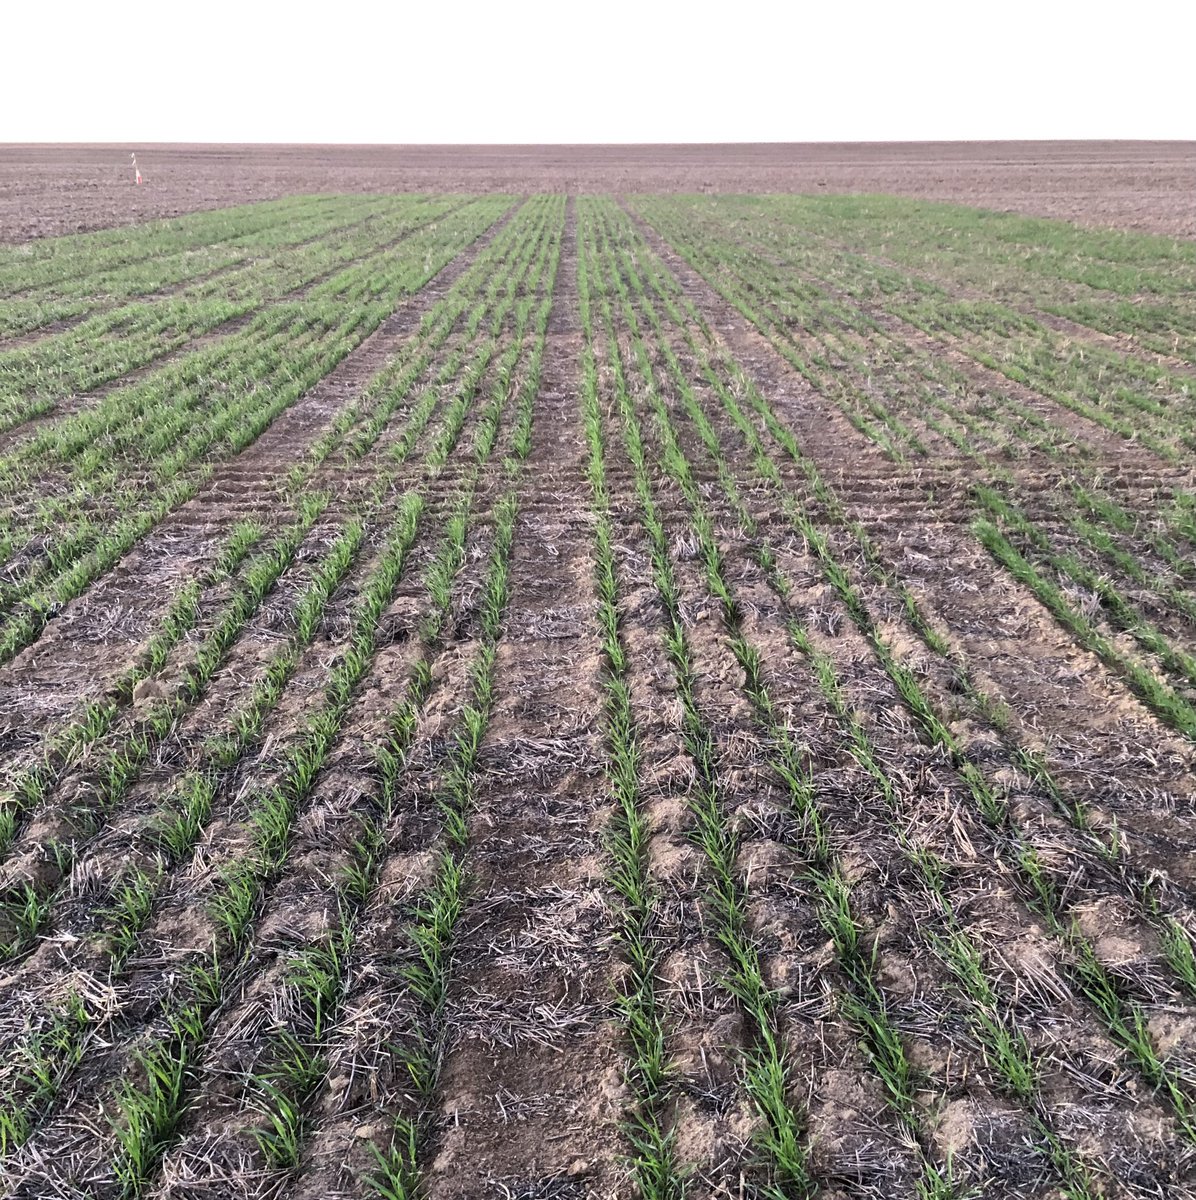 Hyden Early break Wheat NVT looking amazing. One of the few sites that received substantial summer rainfall, the site still had to be irrigated as moisture was further down the profile at seeding. @GRDC_NVT #NVTprovider